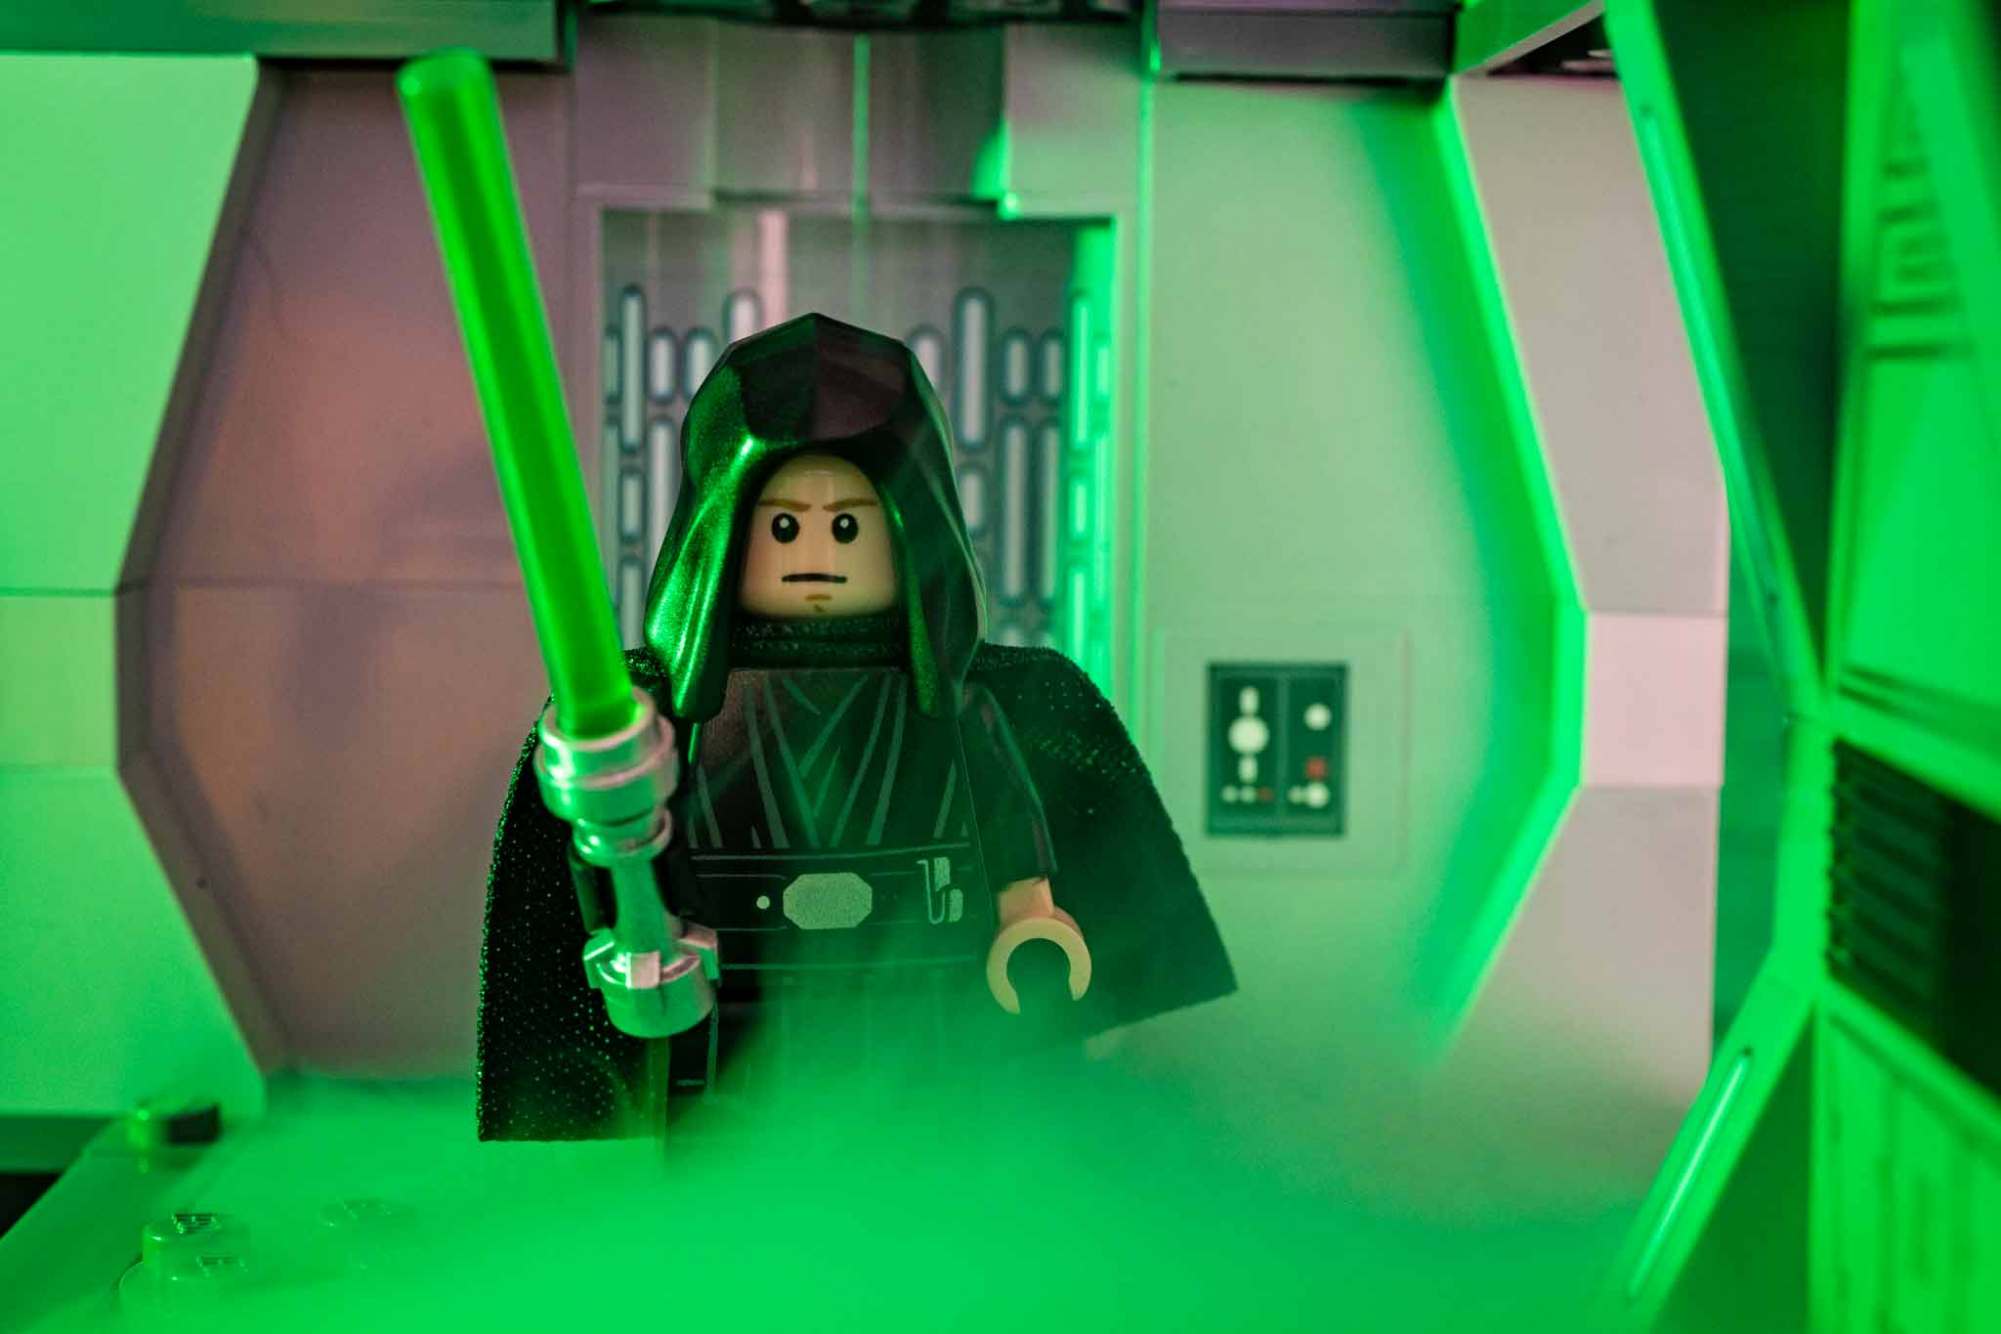 SPOILERS! Fun facts we learn about LEGO Star Wars sets in The Last